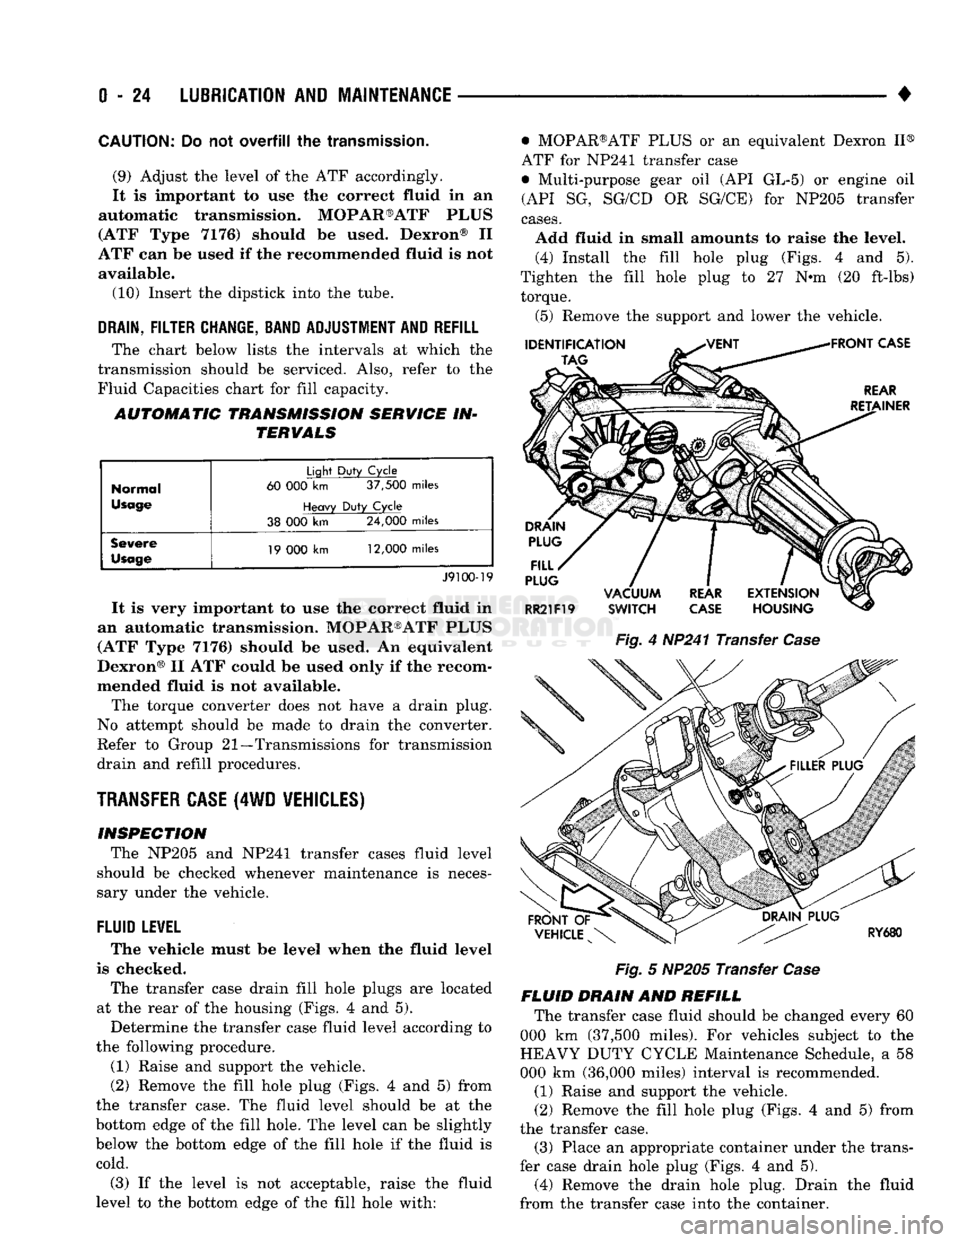 DODGE TRUCK 1993  Service Service Manual 
0
 - 24
 LUBRICATION
 AND
 MAINTENANCE 

• 
CAUTION:
 Do not
 overfill
 the
 transmission. 
(9) Adjust
 the
 level
 of the ATF
 accordingly. 
It
 is
 important
 to use the
 correct fluid
 in an 

a